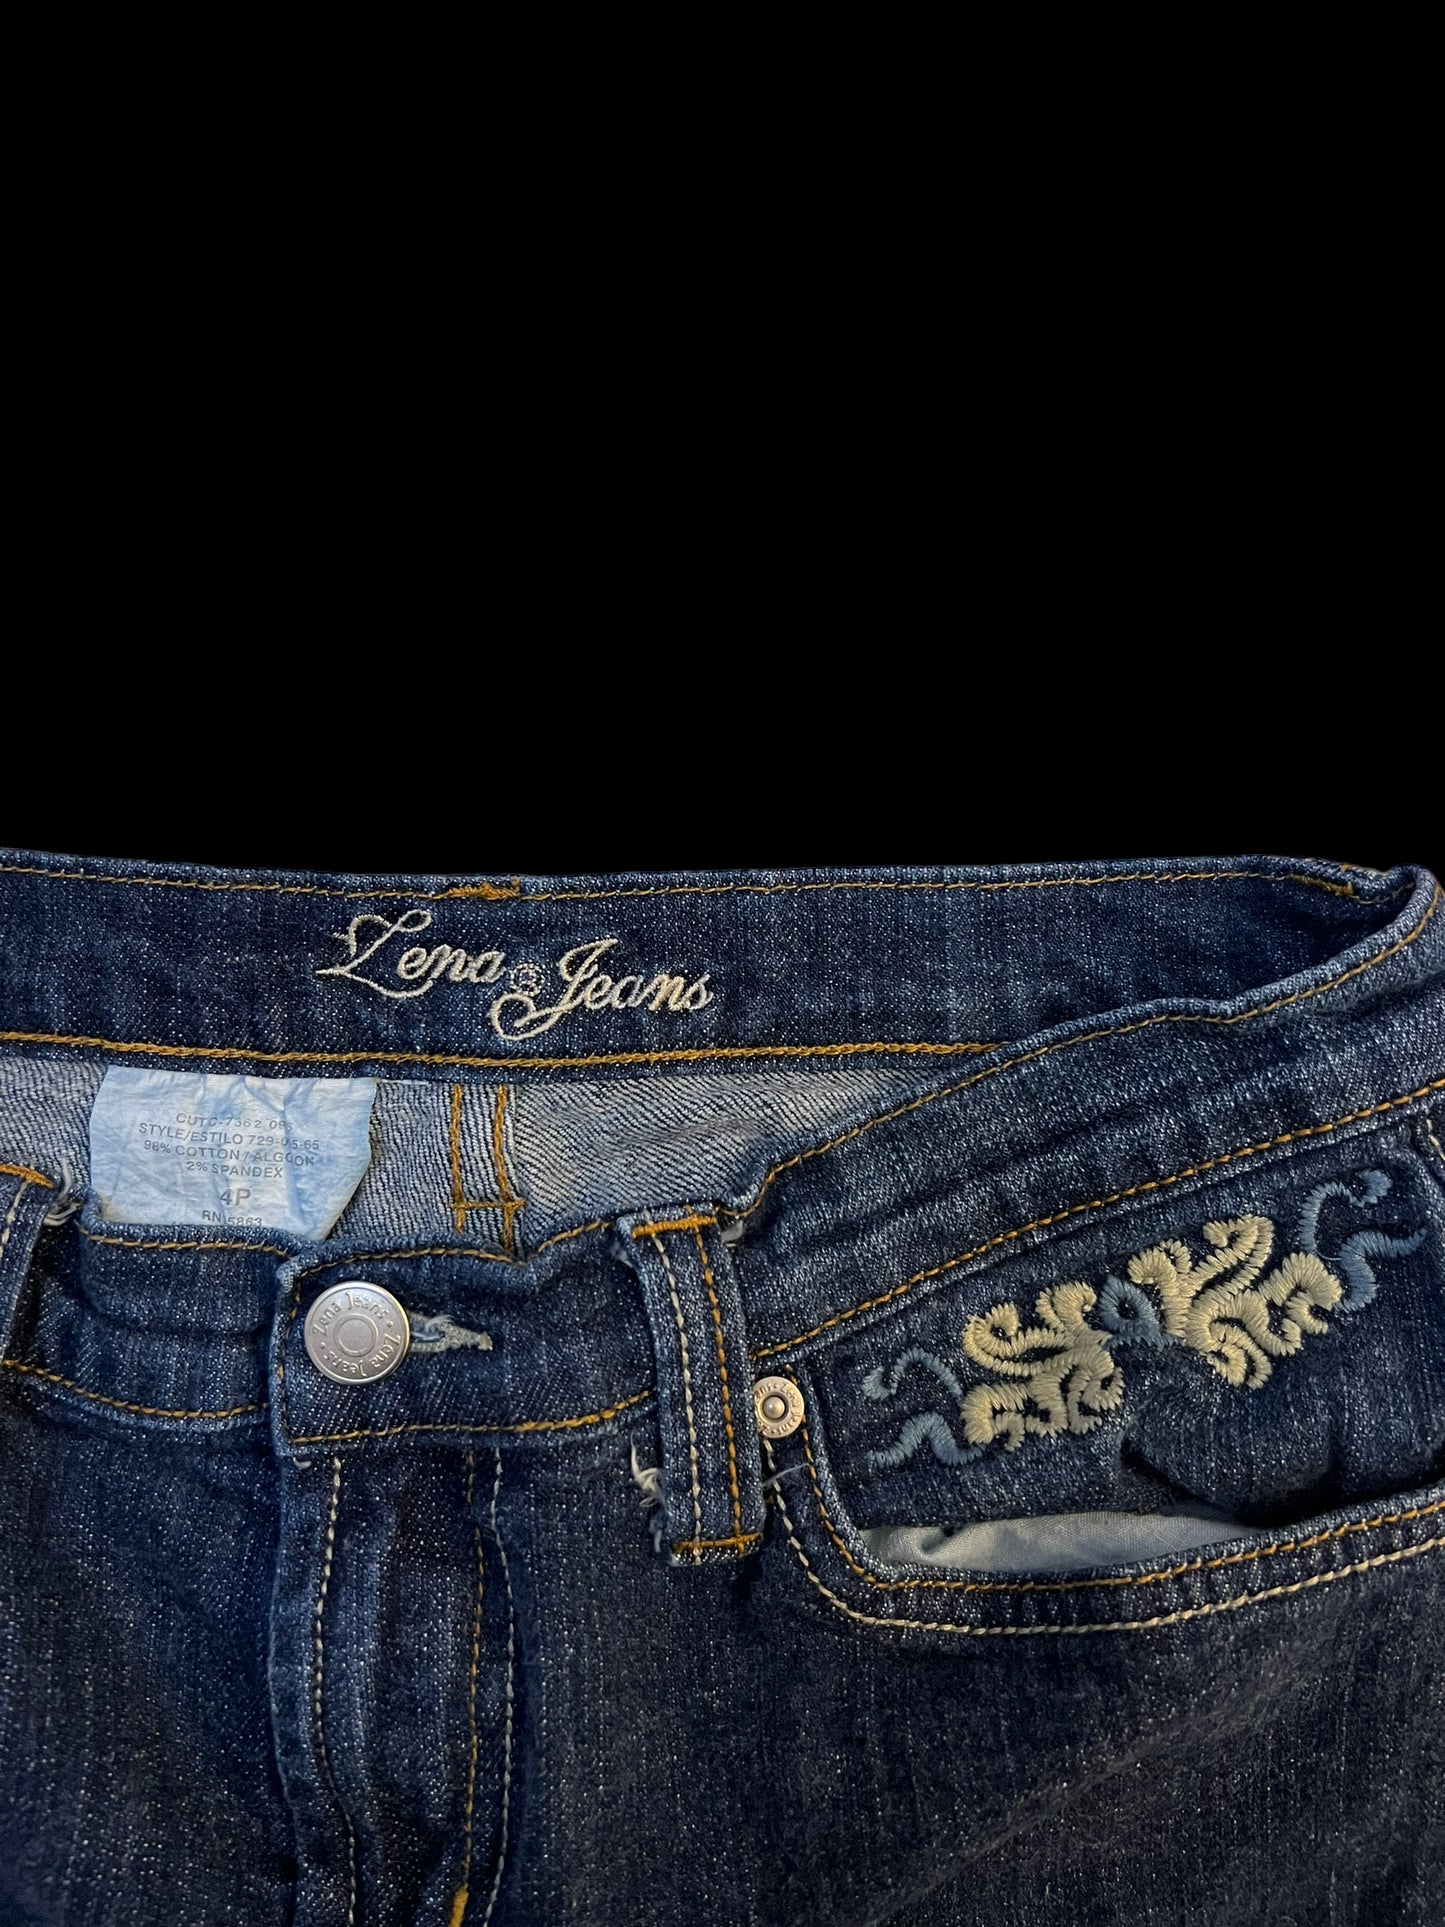 Embroidered jeans